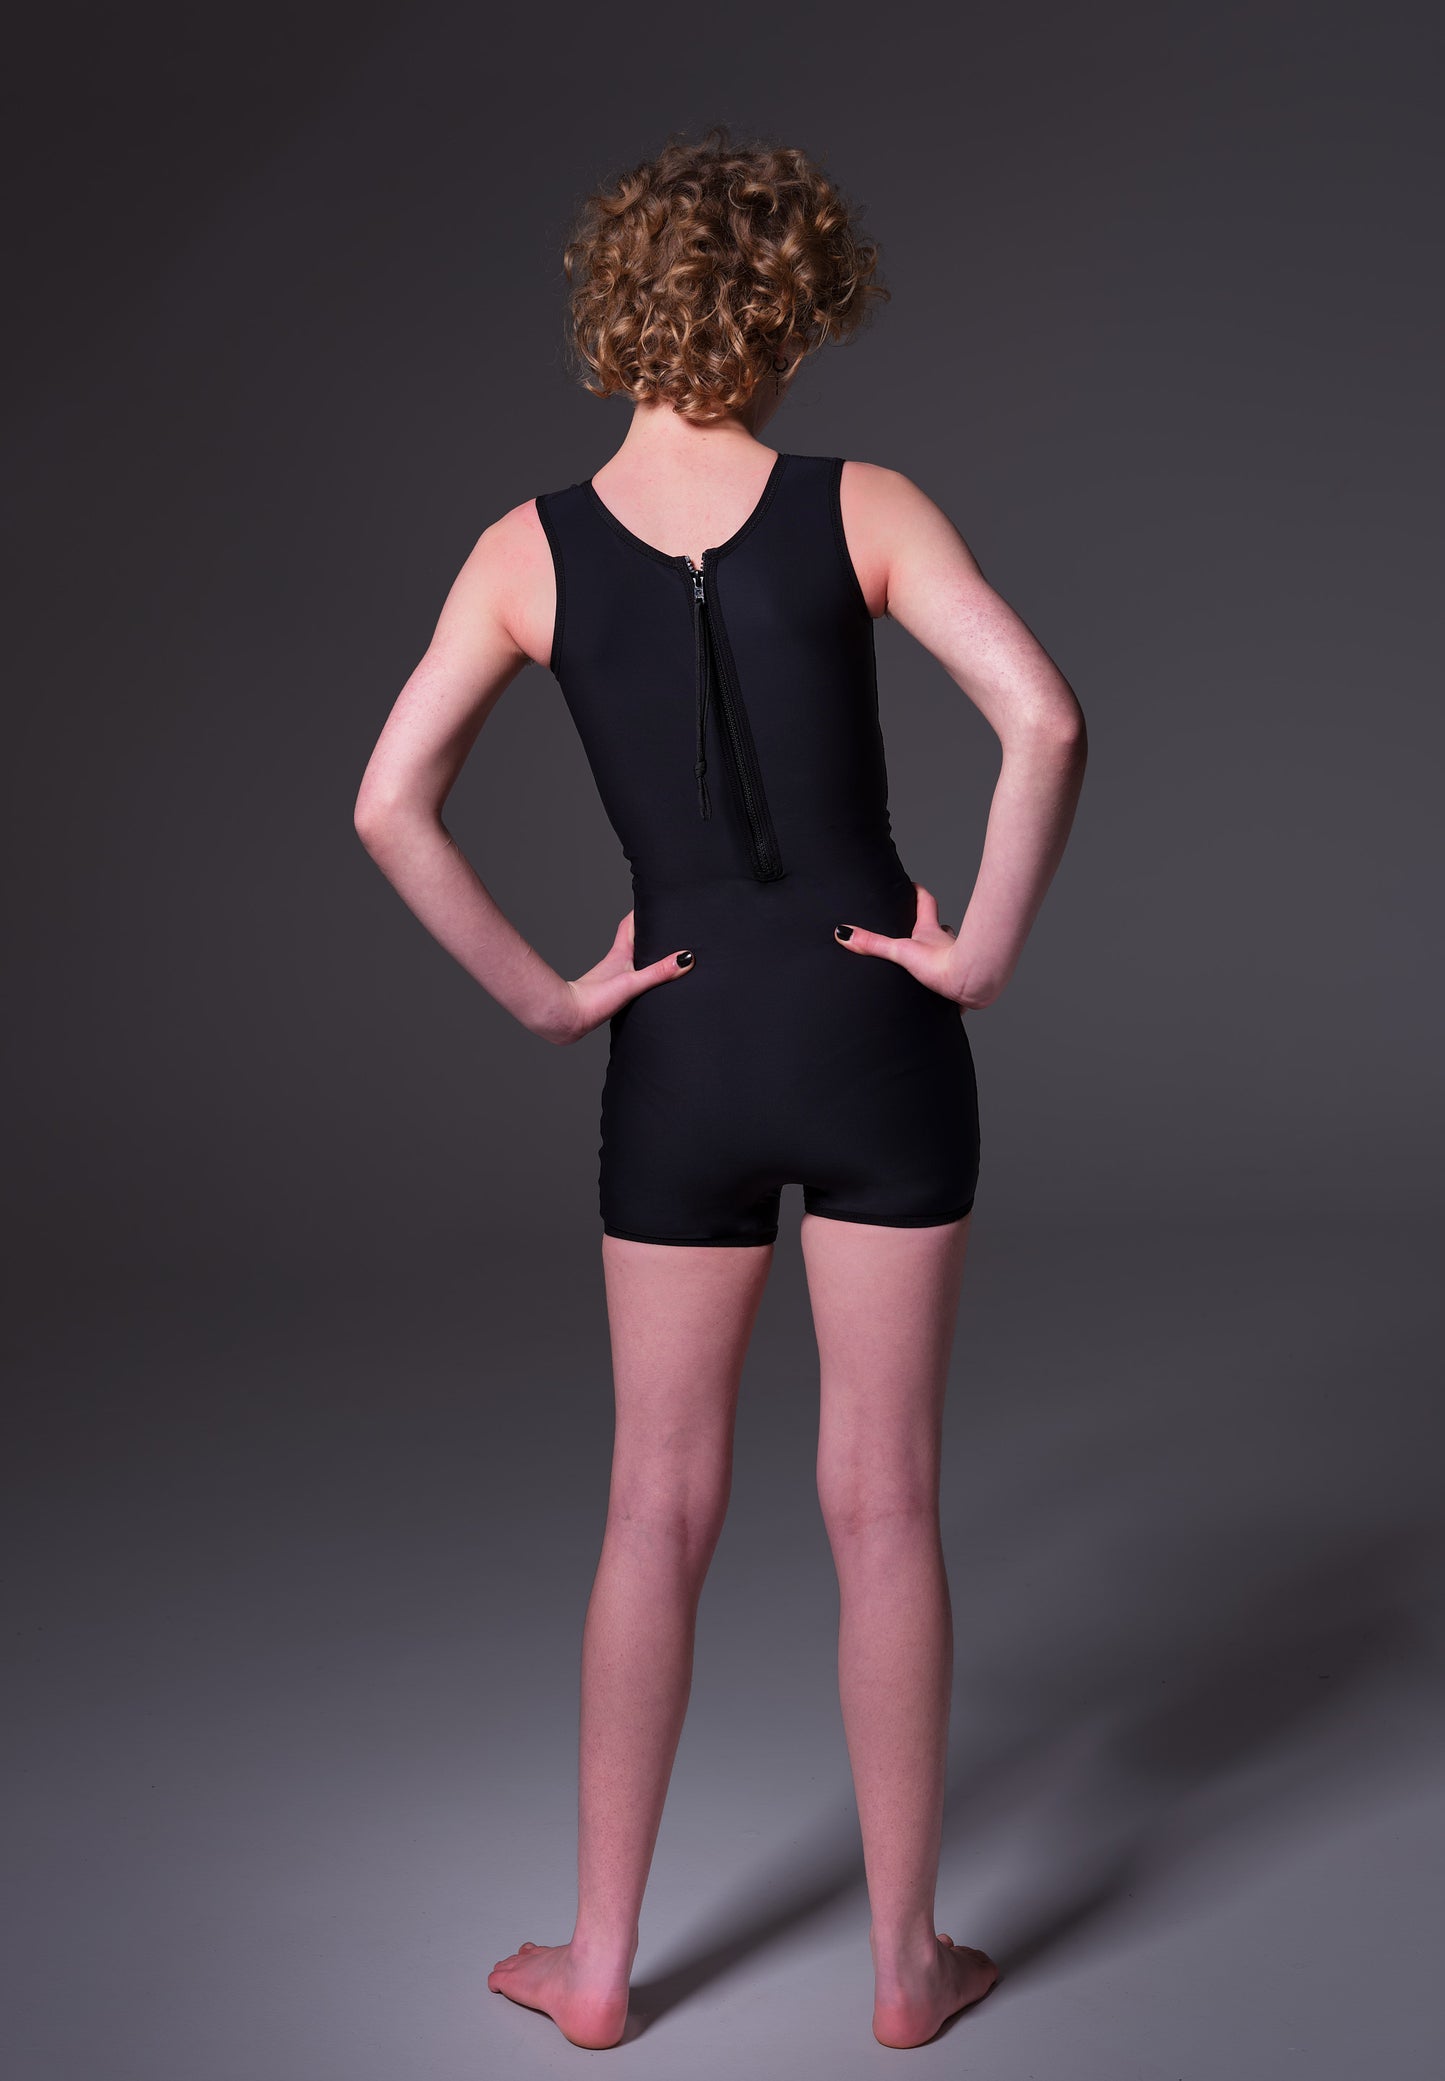 Model Lo wearing the Swimsuit Binder black, back view